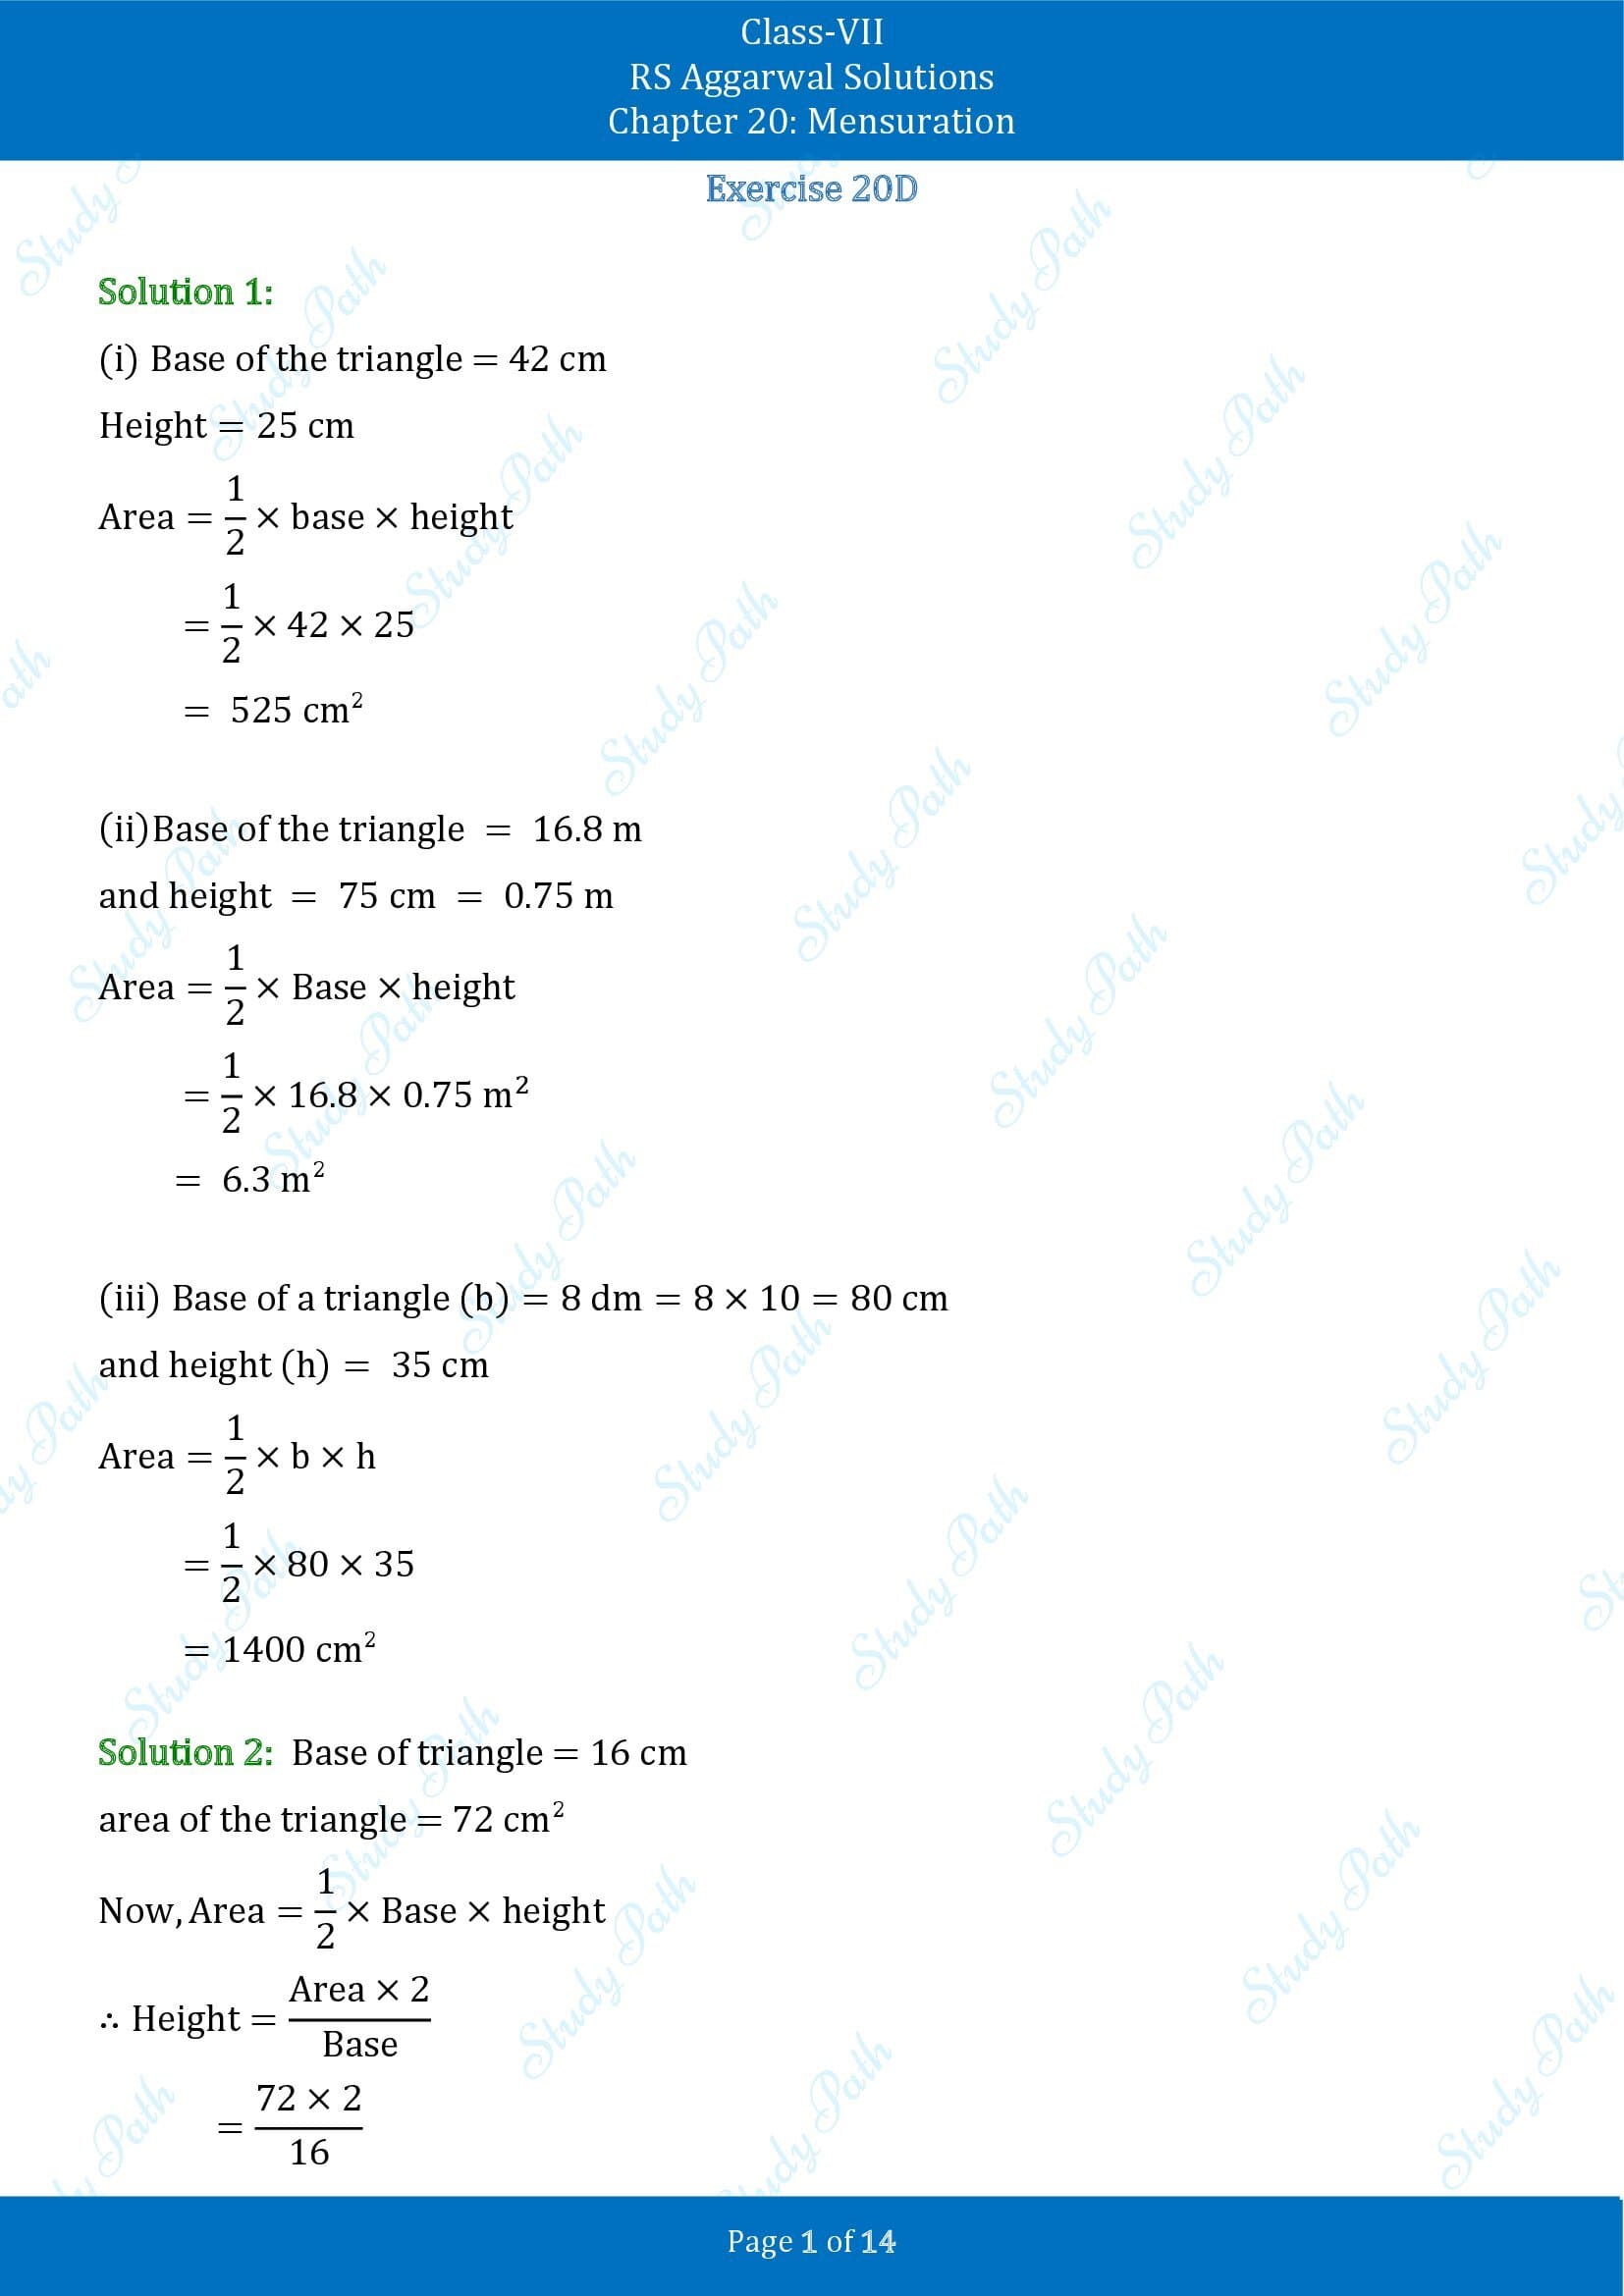 RS Aggarwal Solutions Class 7 Chapter 20 Mensuration Exercise 20D 00001